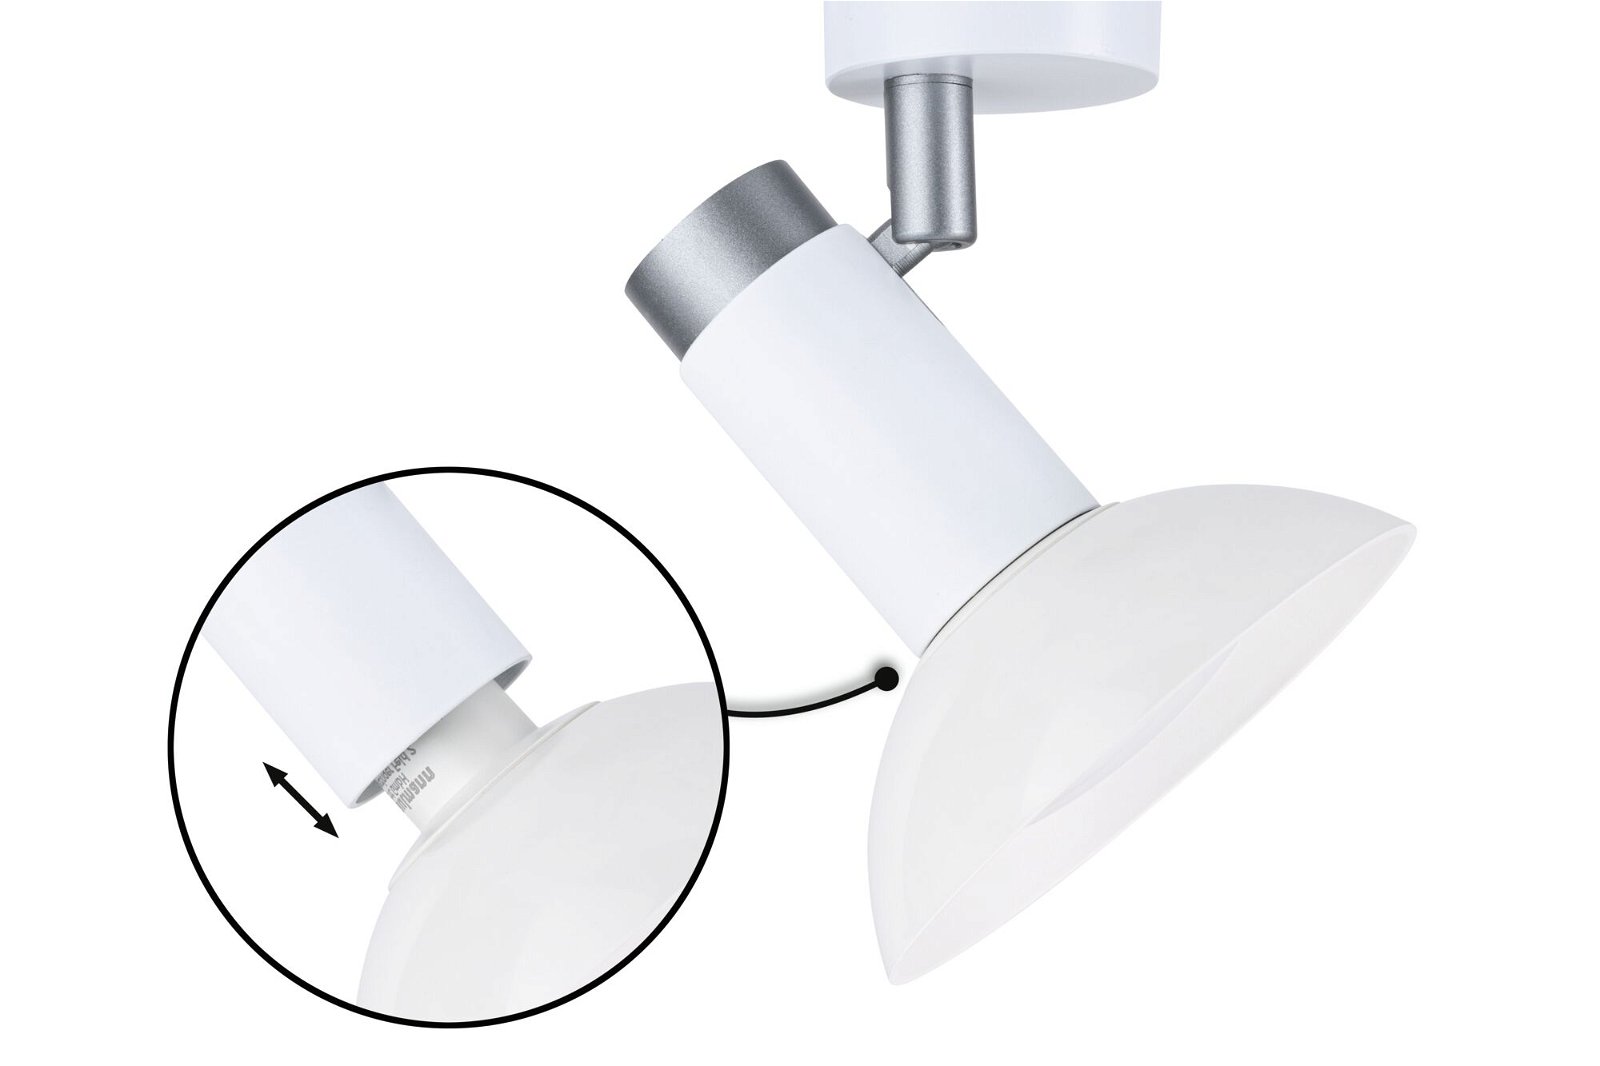 Neordic Wall and ceiling lamp Runa GU10 230V max. 20W dimmable White/Grey